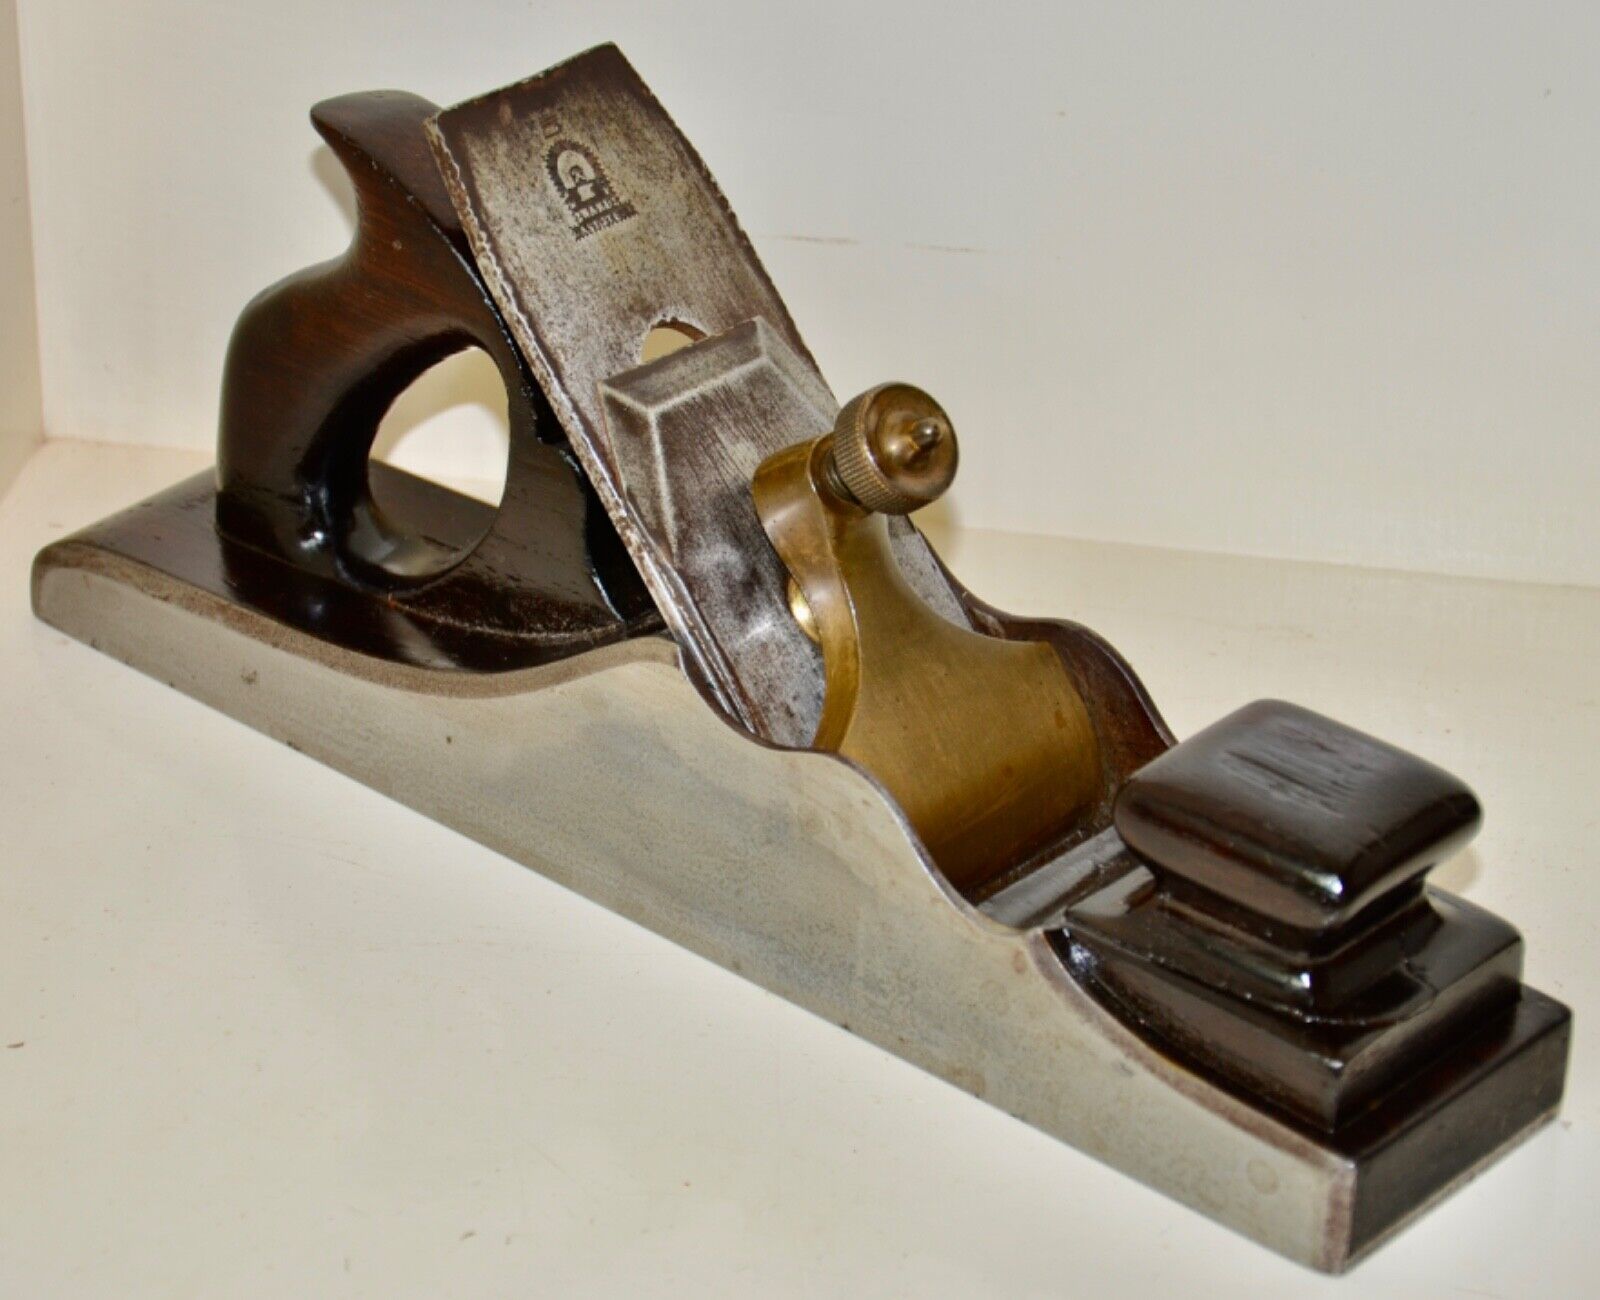 MATHIESON STAMPED ON BUN NORRIS MADE DOVETIAL STEEL ROSEWOOD INFILL PANEL PLANE